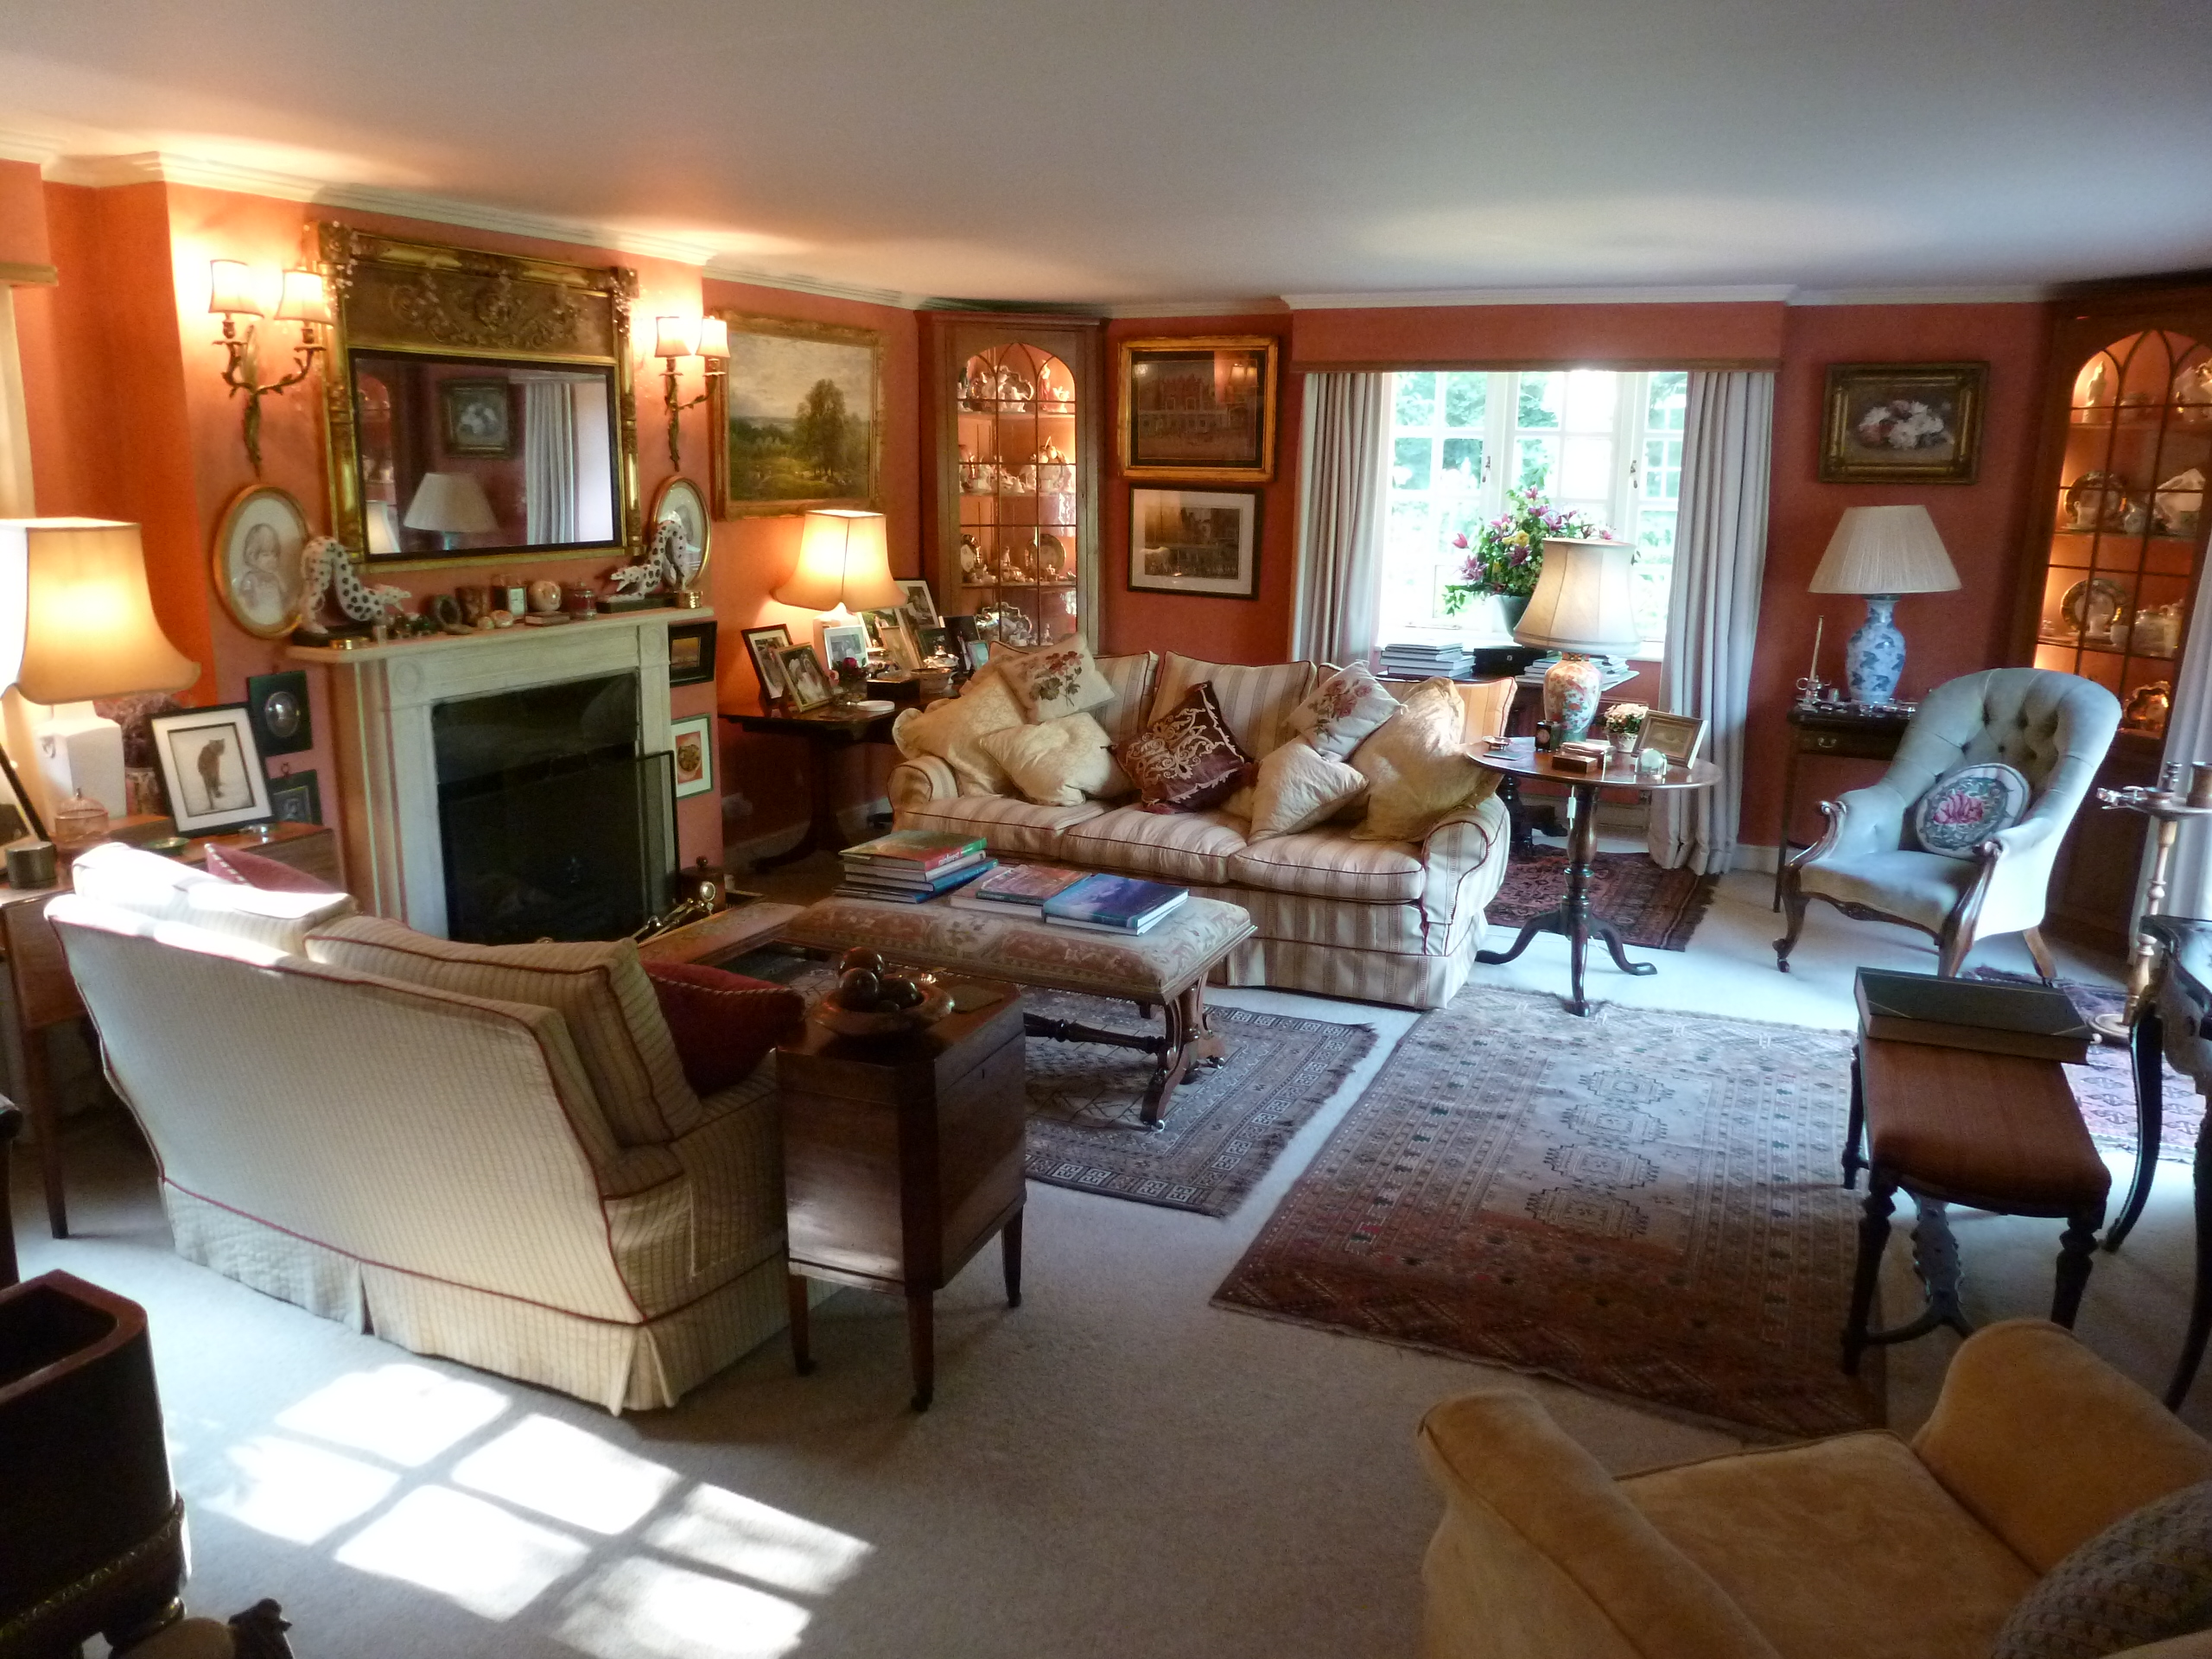 Our guests can relax in the sitting room with its log fire, fine antiques, big comfy sofas